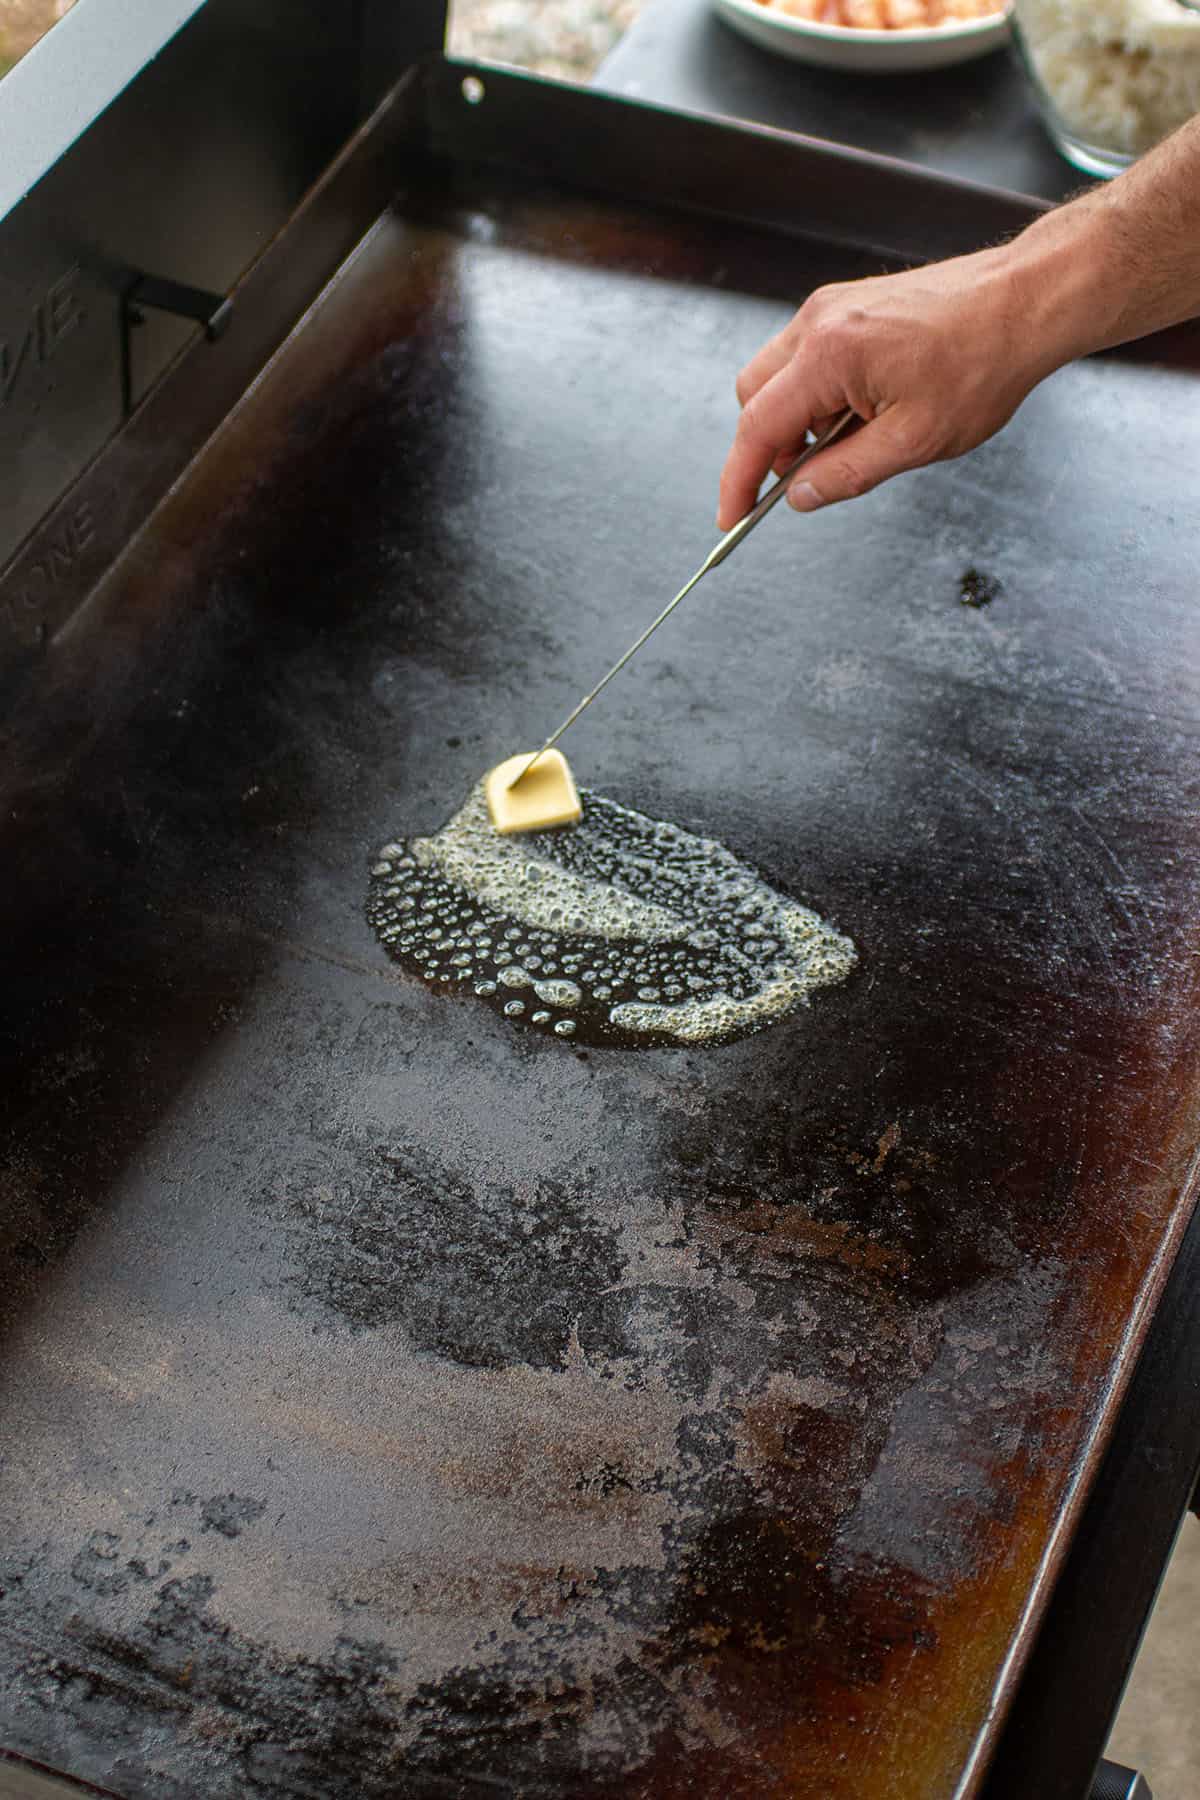 Tablespoon of butter being melted on a Blackstone.